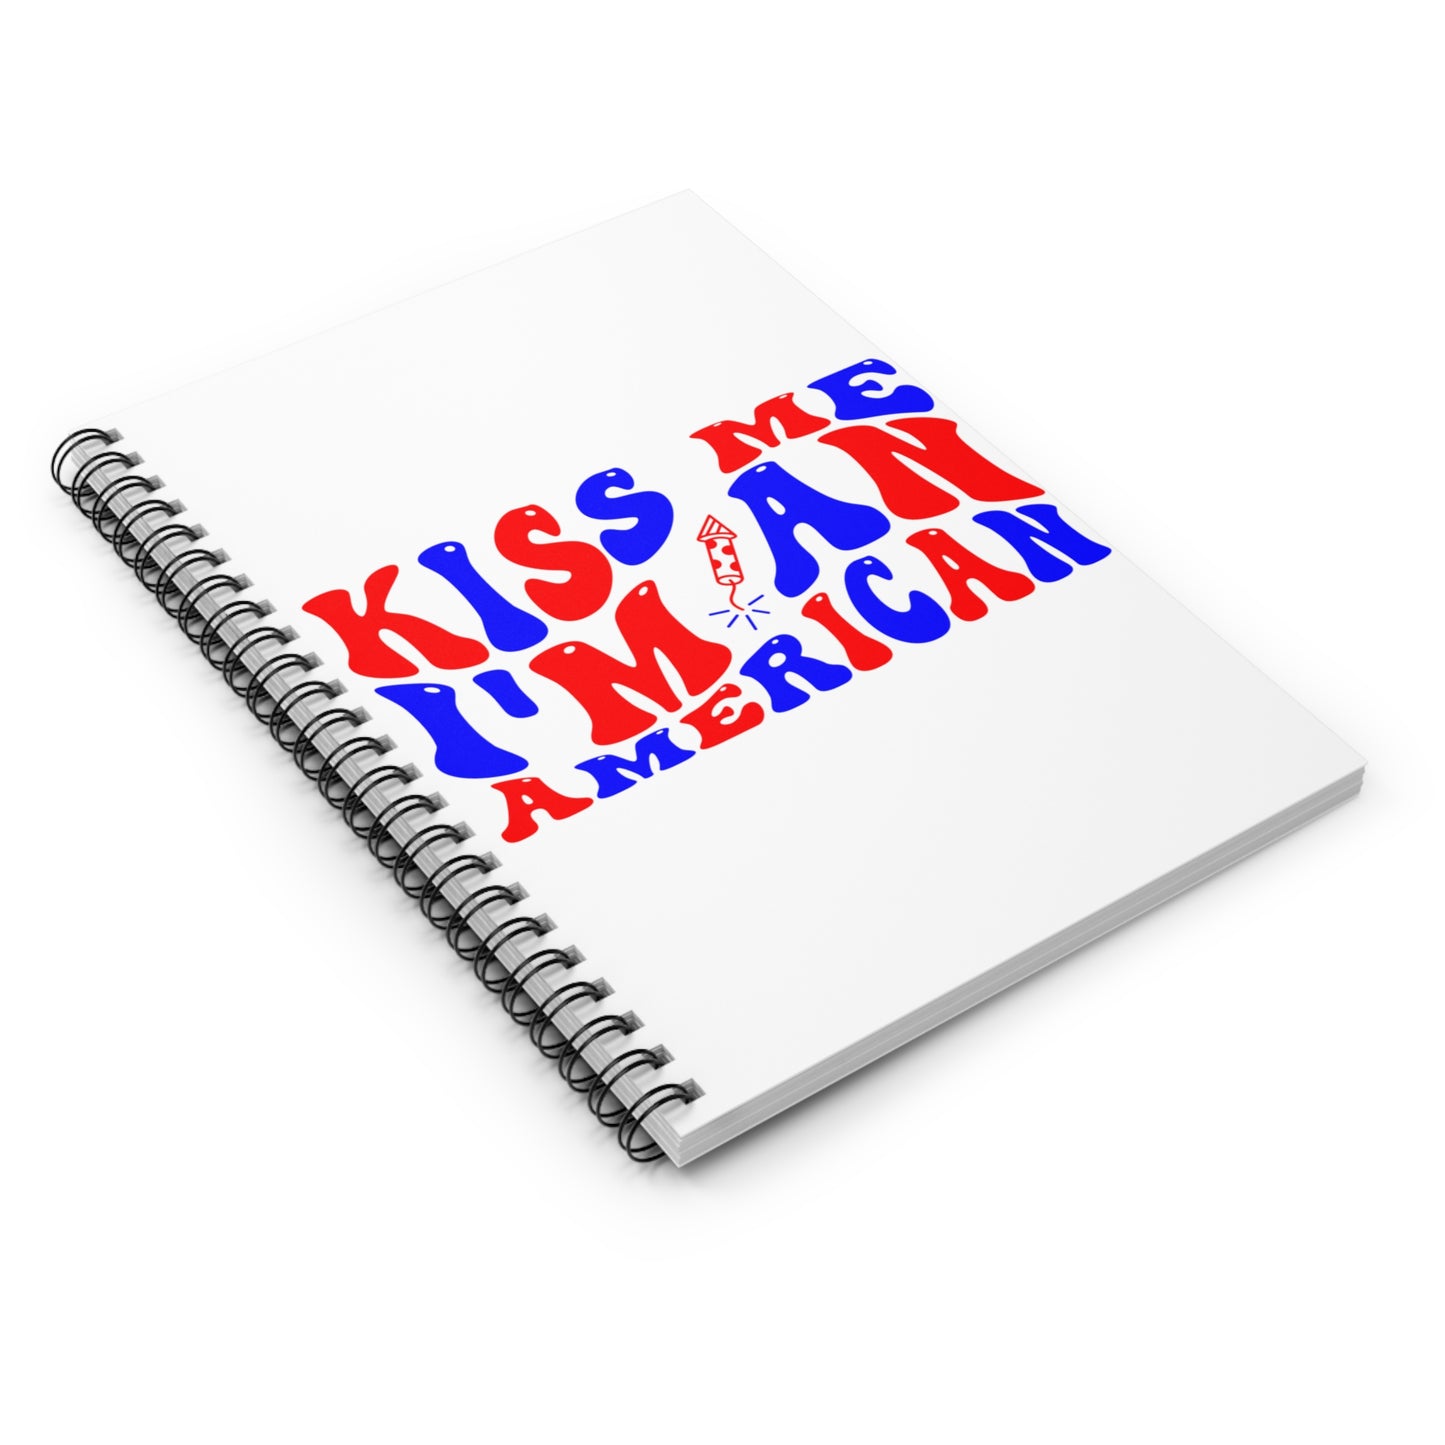 Kiss Me I'm American: Spiral Notebook - Log Books - Journals - Diaries - and More Custom Printed by TheGlassyLass